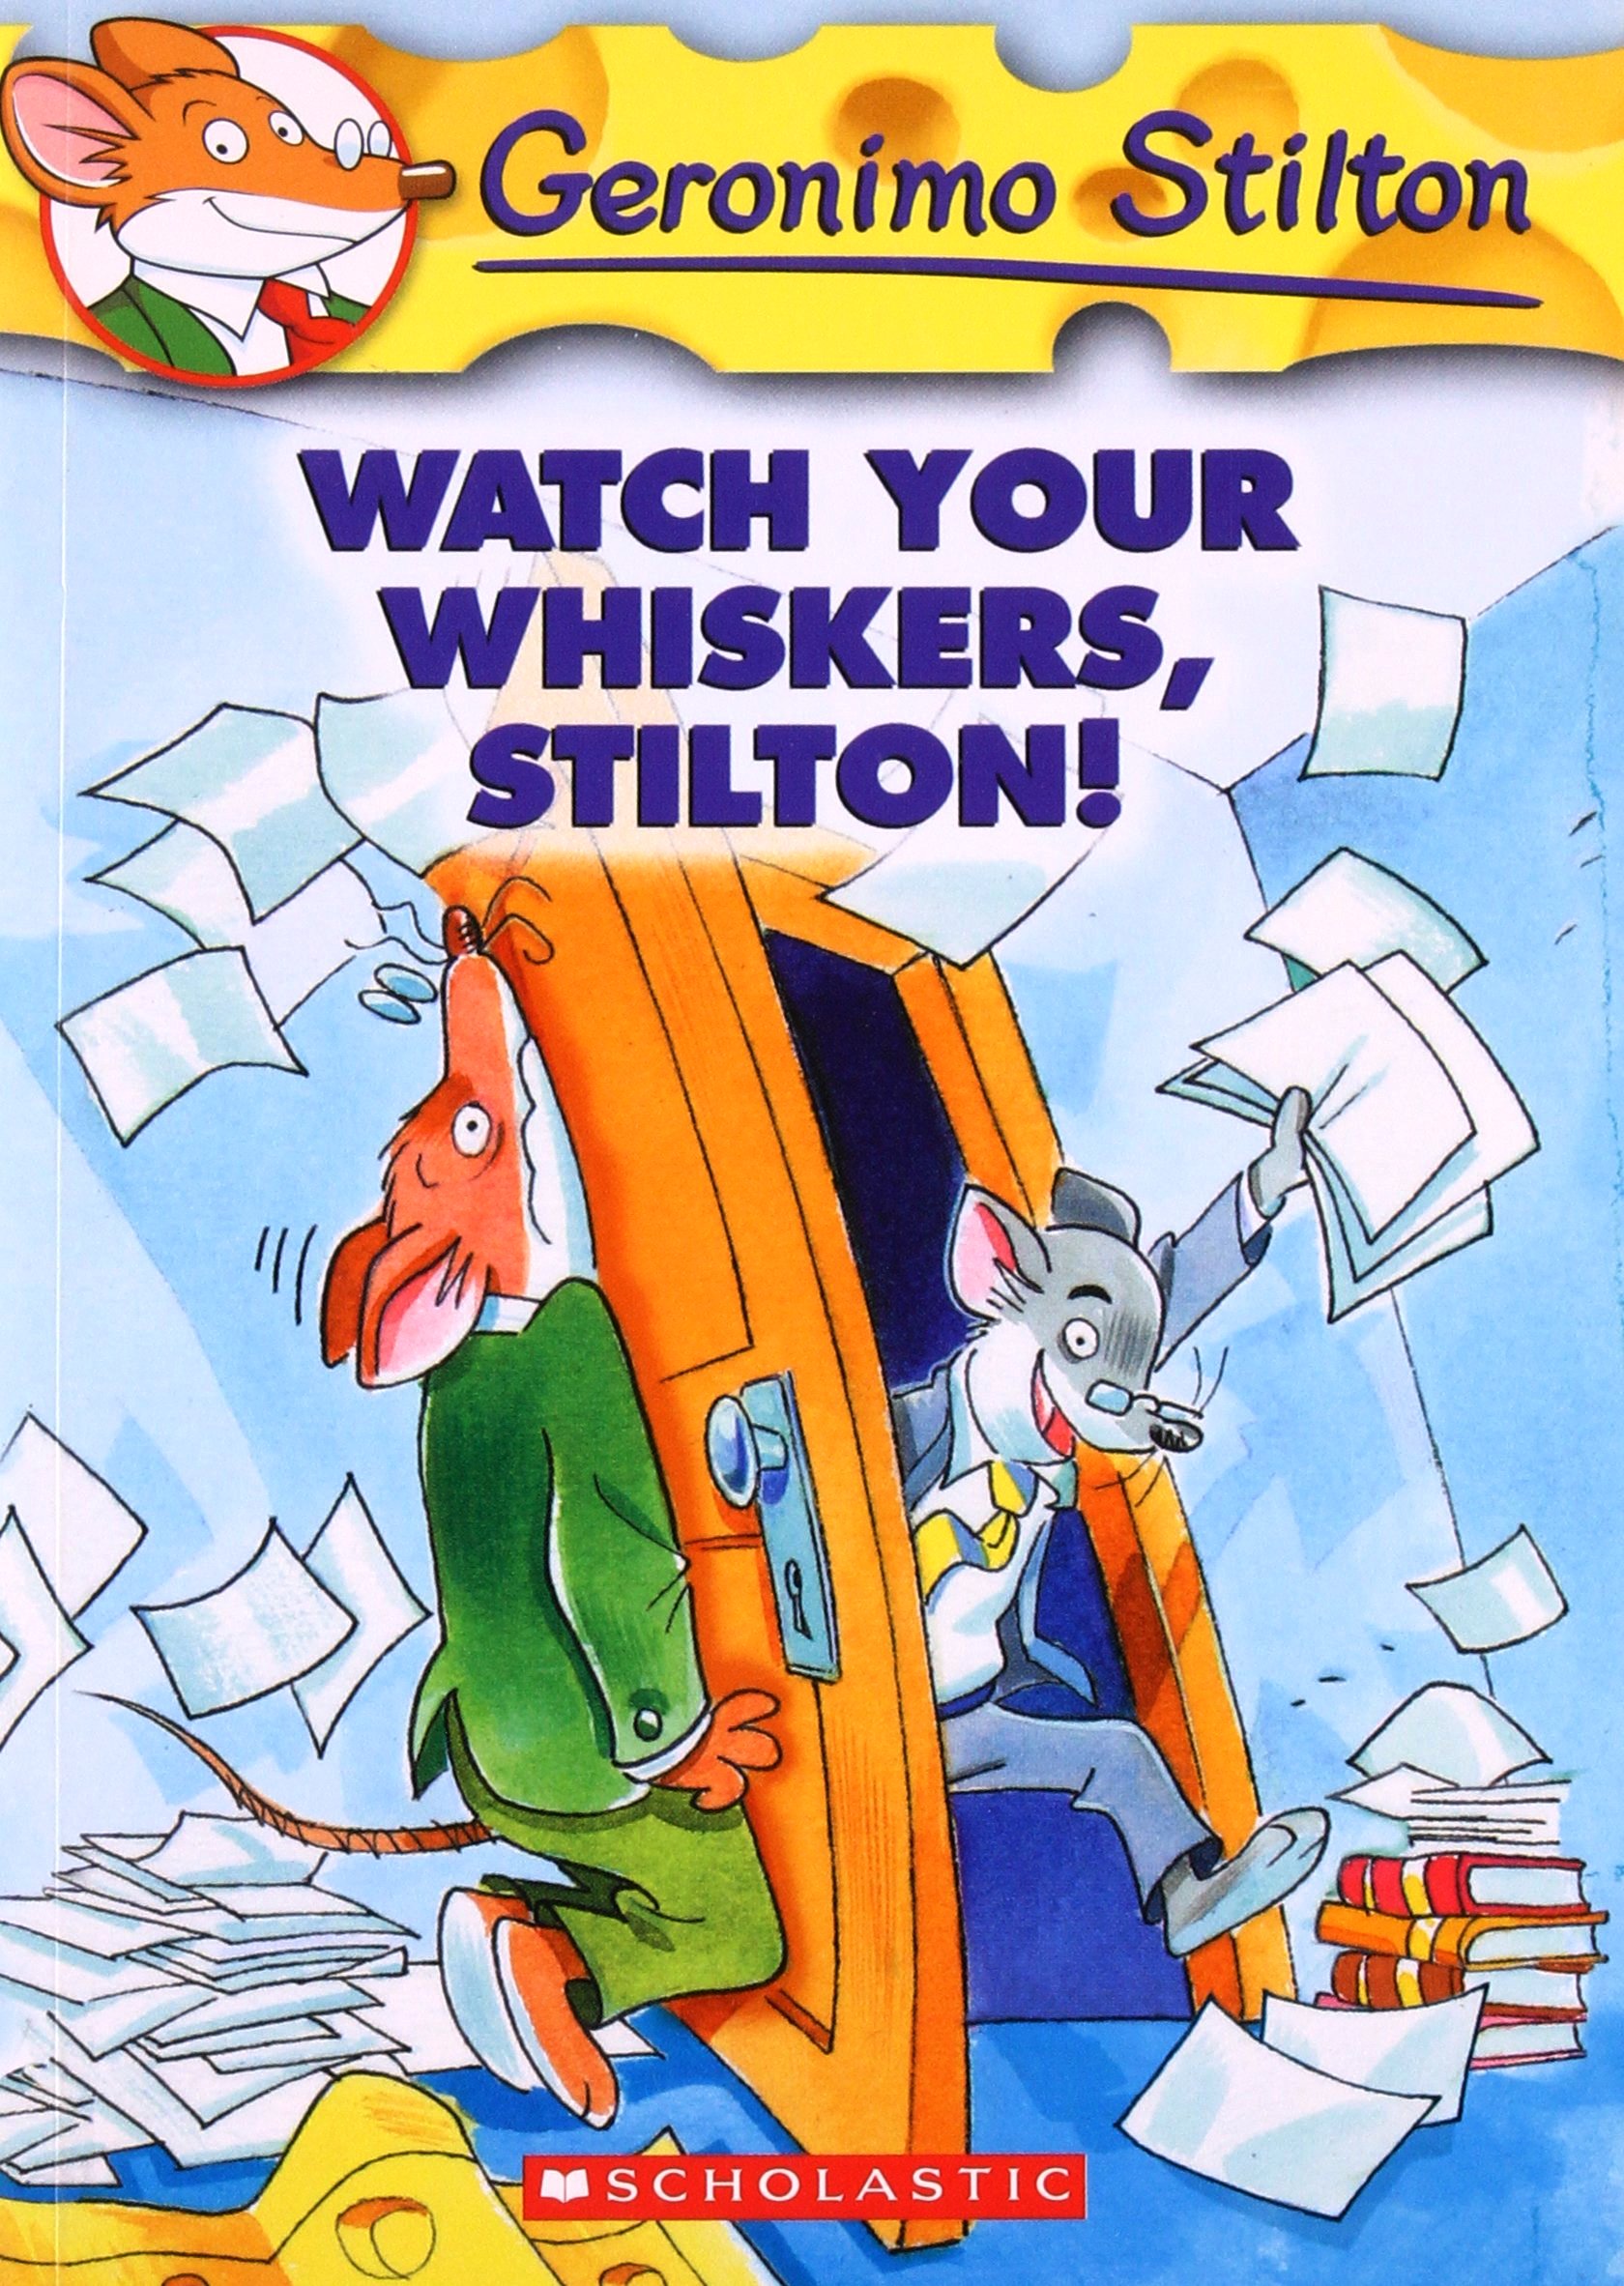 Watch Your Whiskers, Stilton!